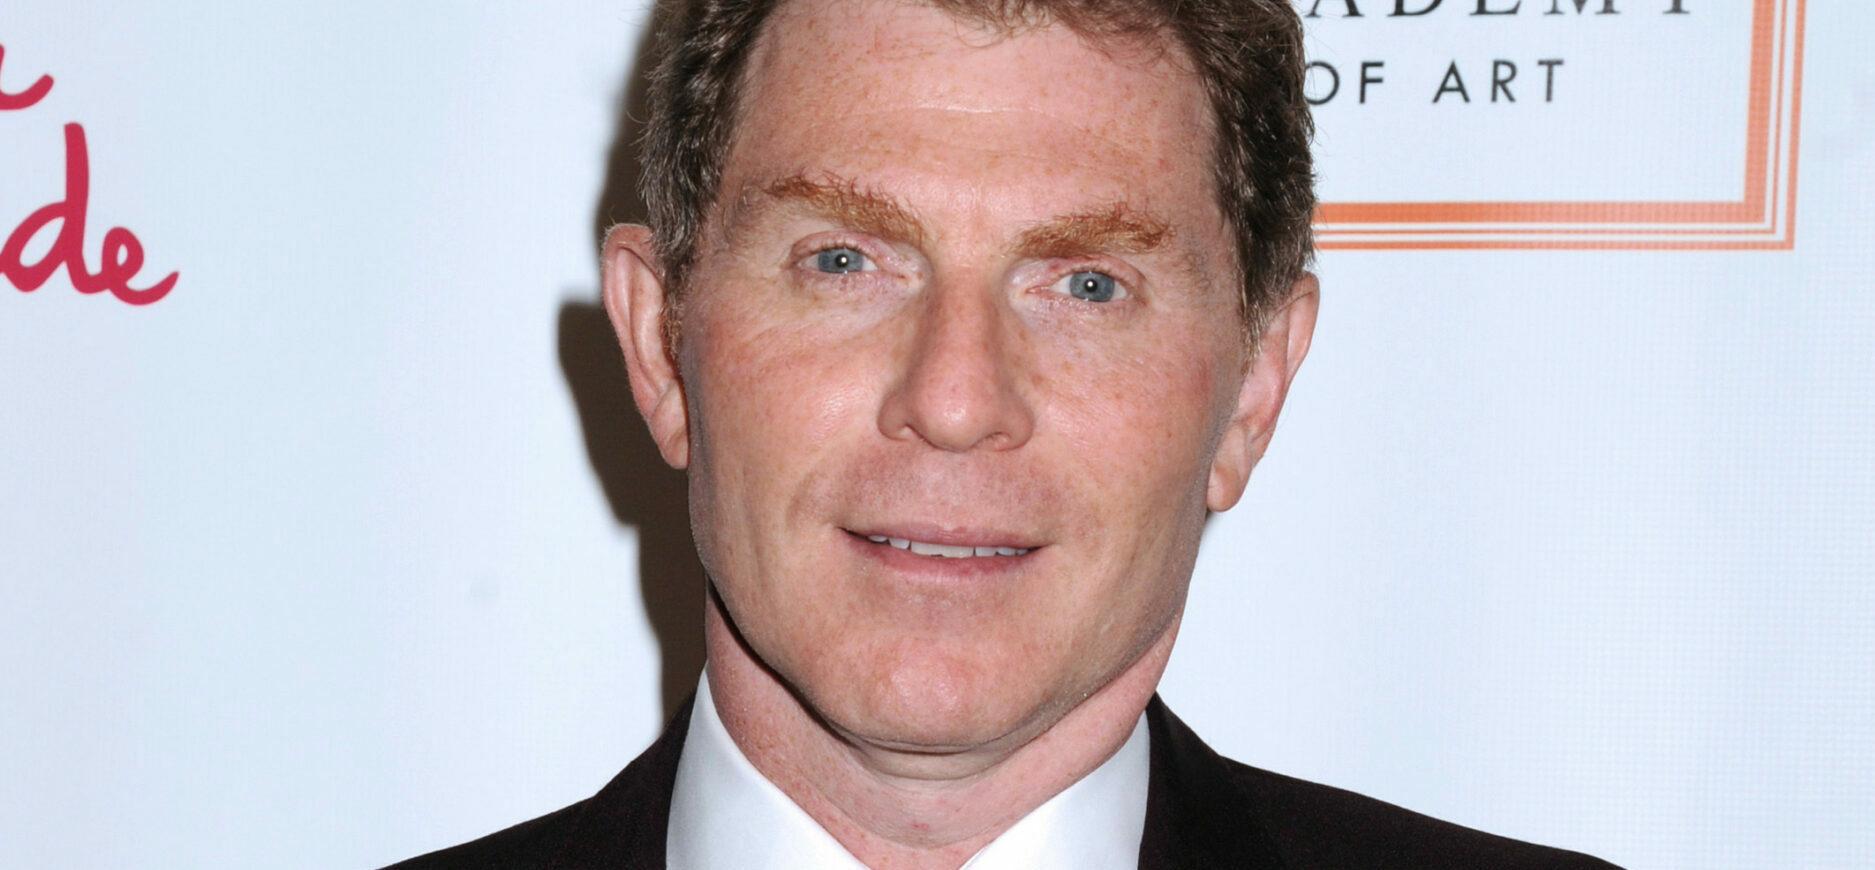 Bobby Flay at Take Home A Nude Art Auction And Party To Benefit New York Academy Of Art